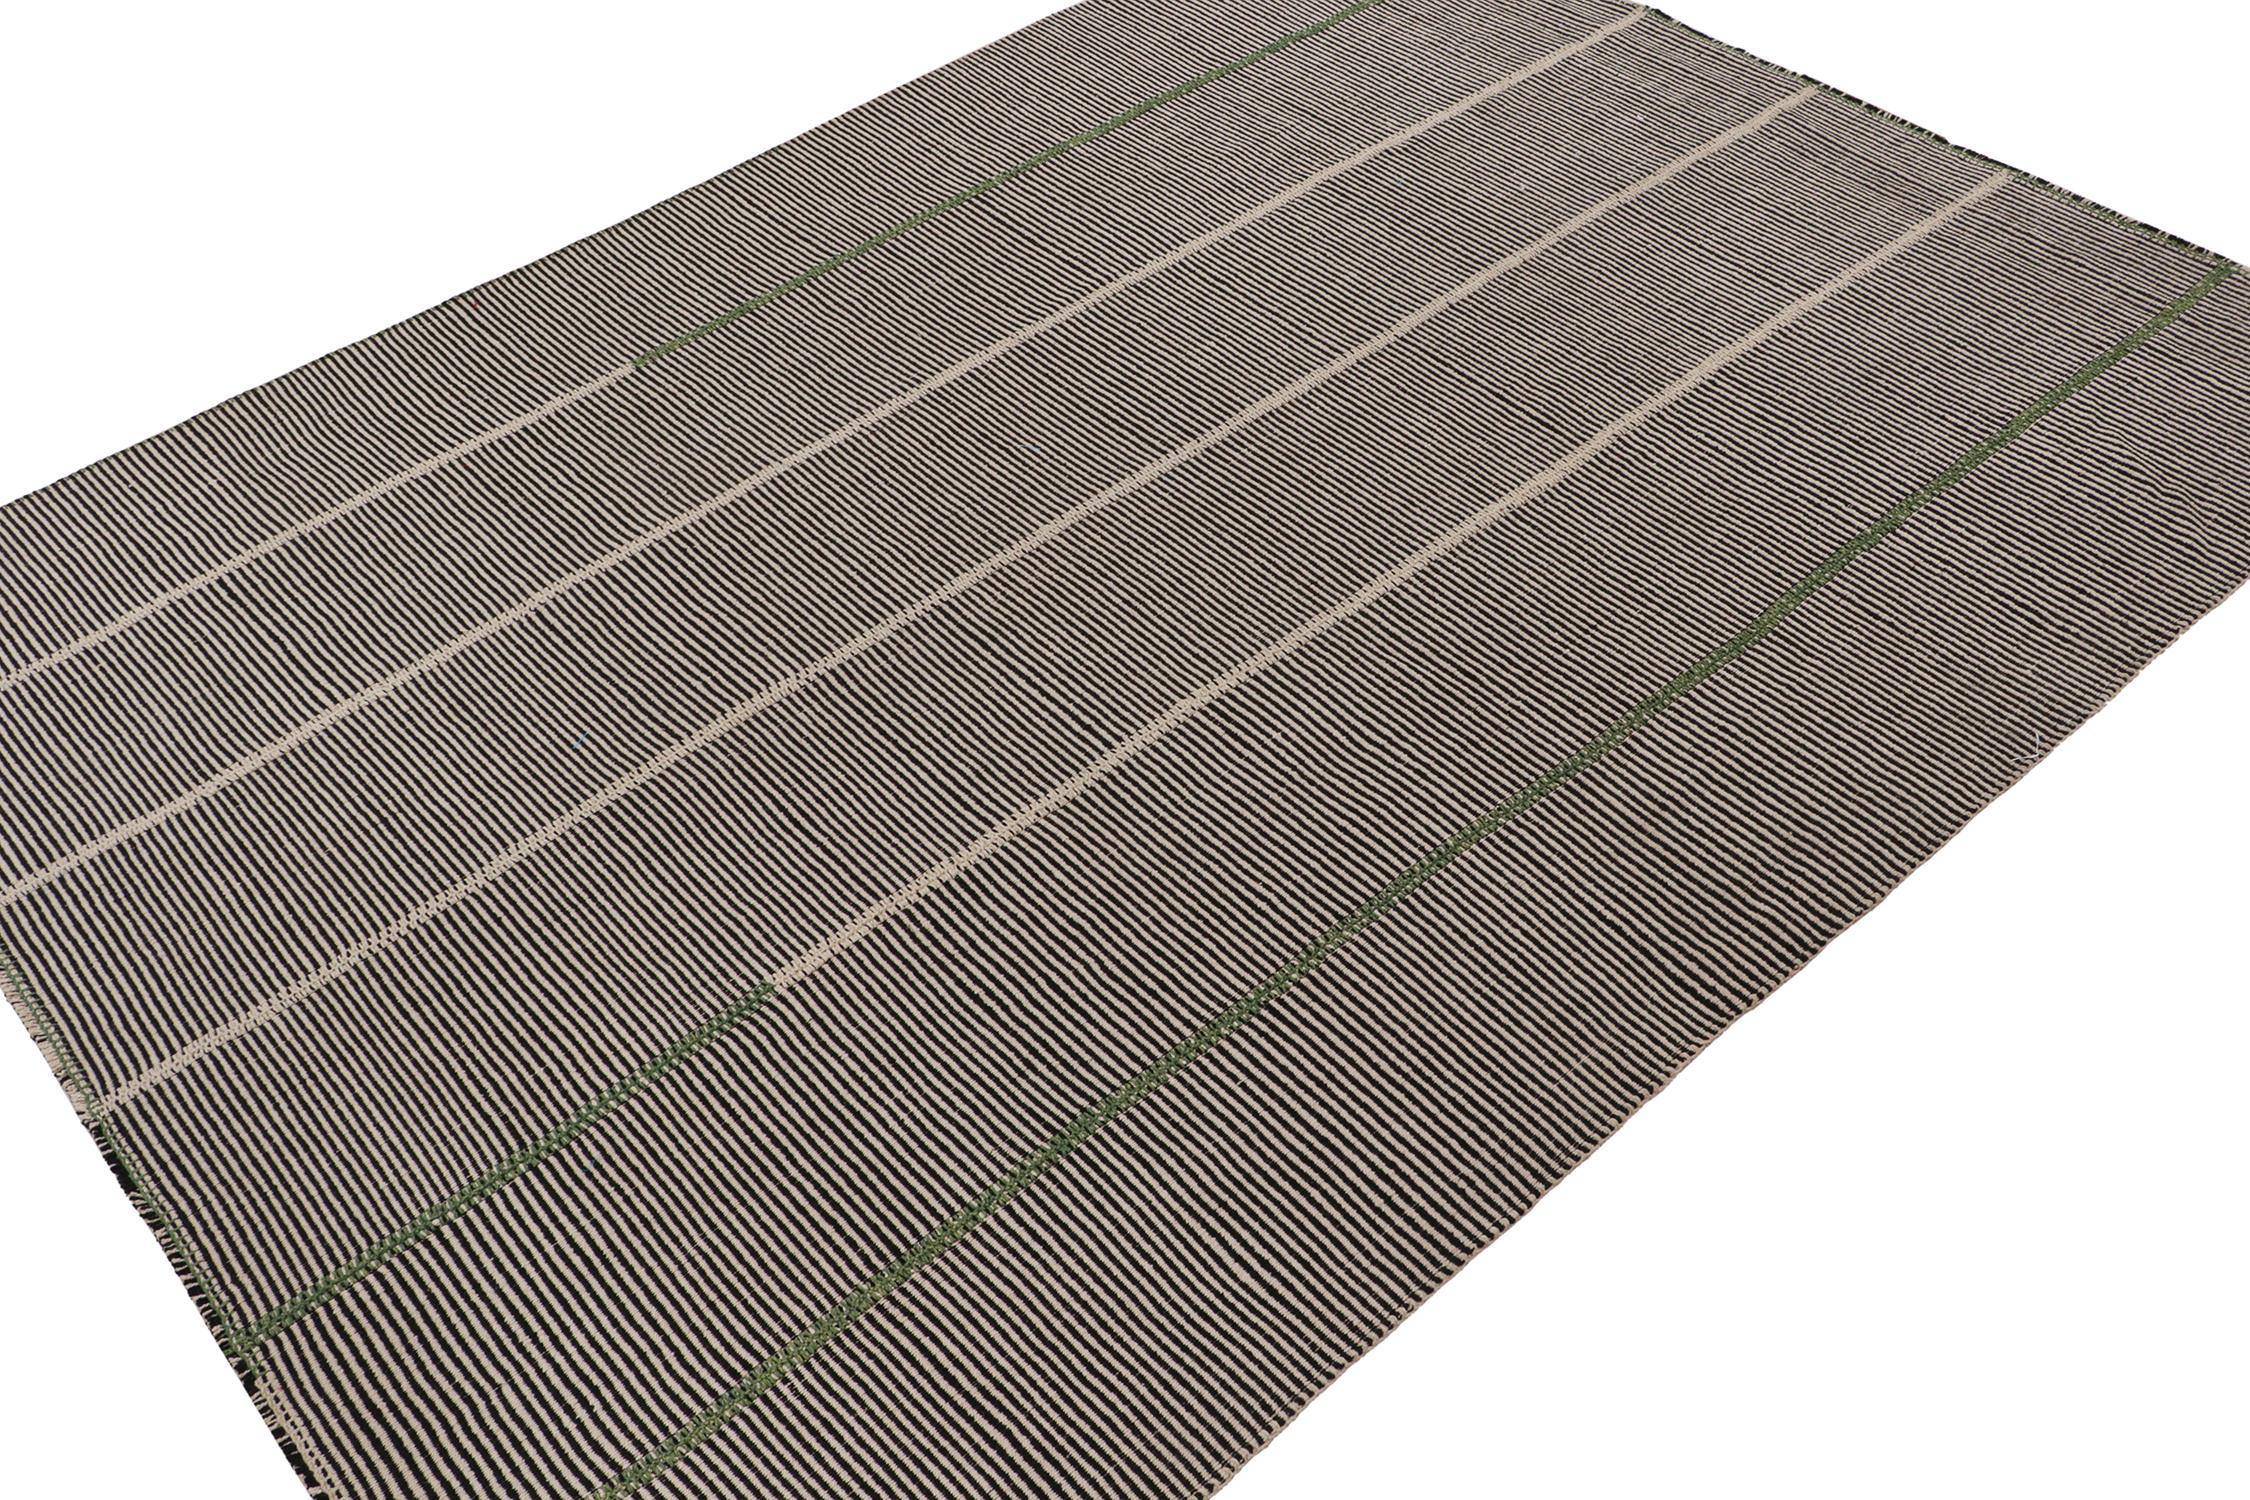 Handwoven in wool, this 10x13 Kilim is from a bold new line of contemporary flatweaves by Rug & Kilim.

Further On the Design:

The “Rez Kilim” connotes a modern take on classic panel weaving. This edition enjoys a play of black and beige stripes